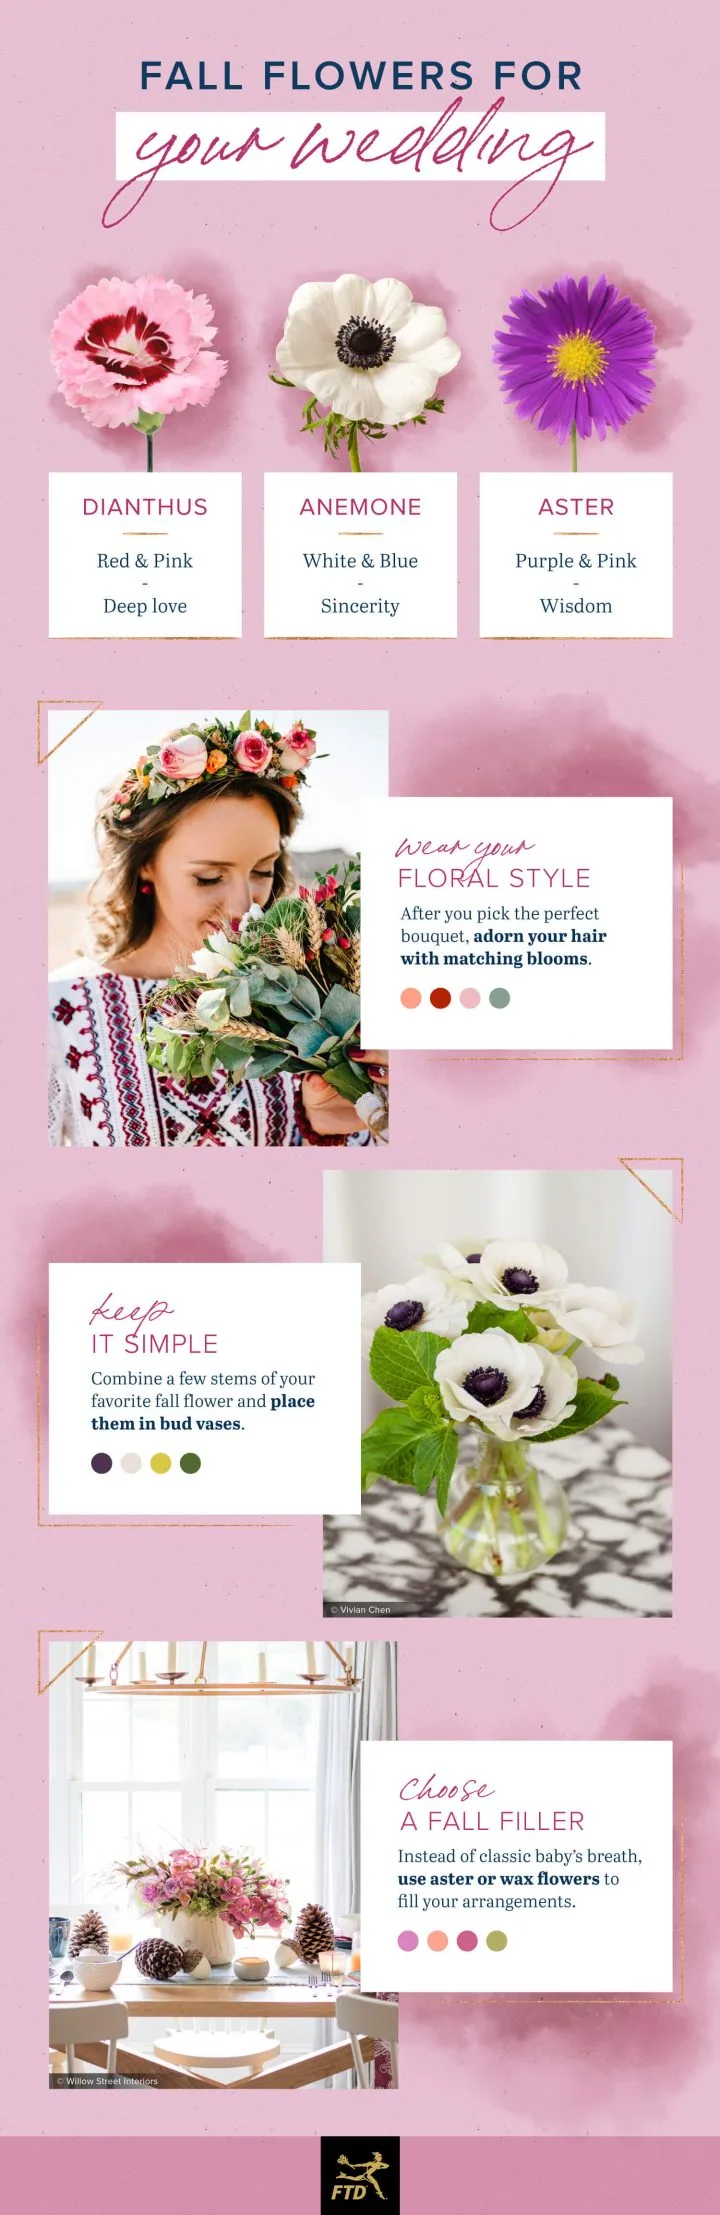 17 Fall Flowers and How to Style Them